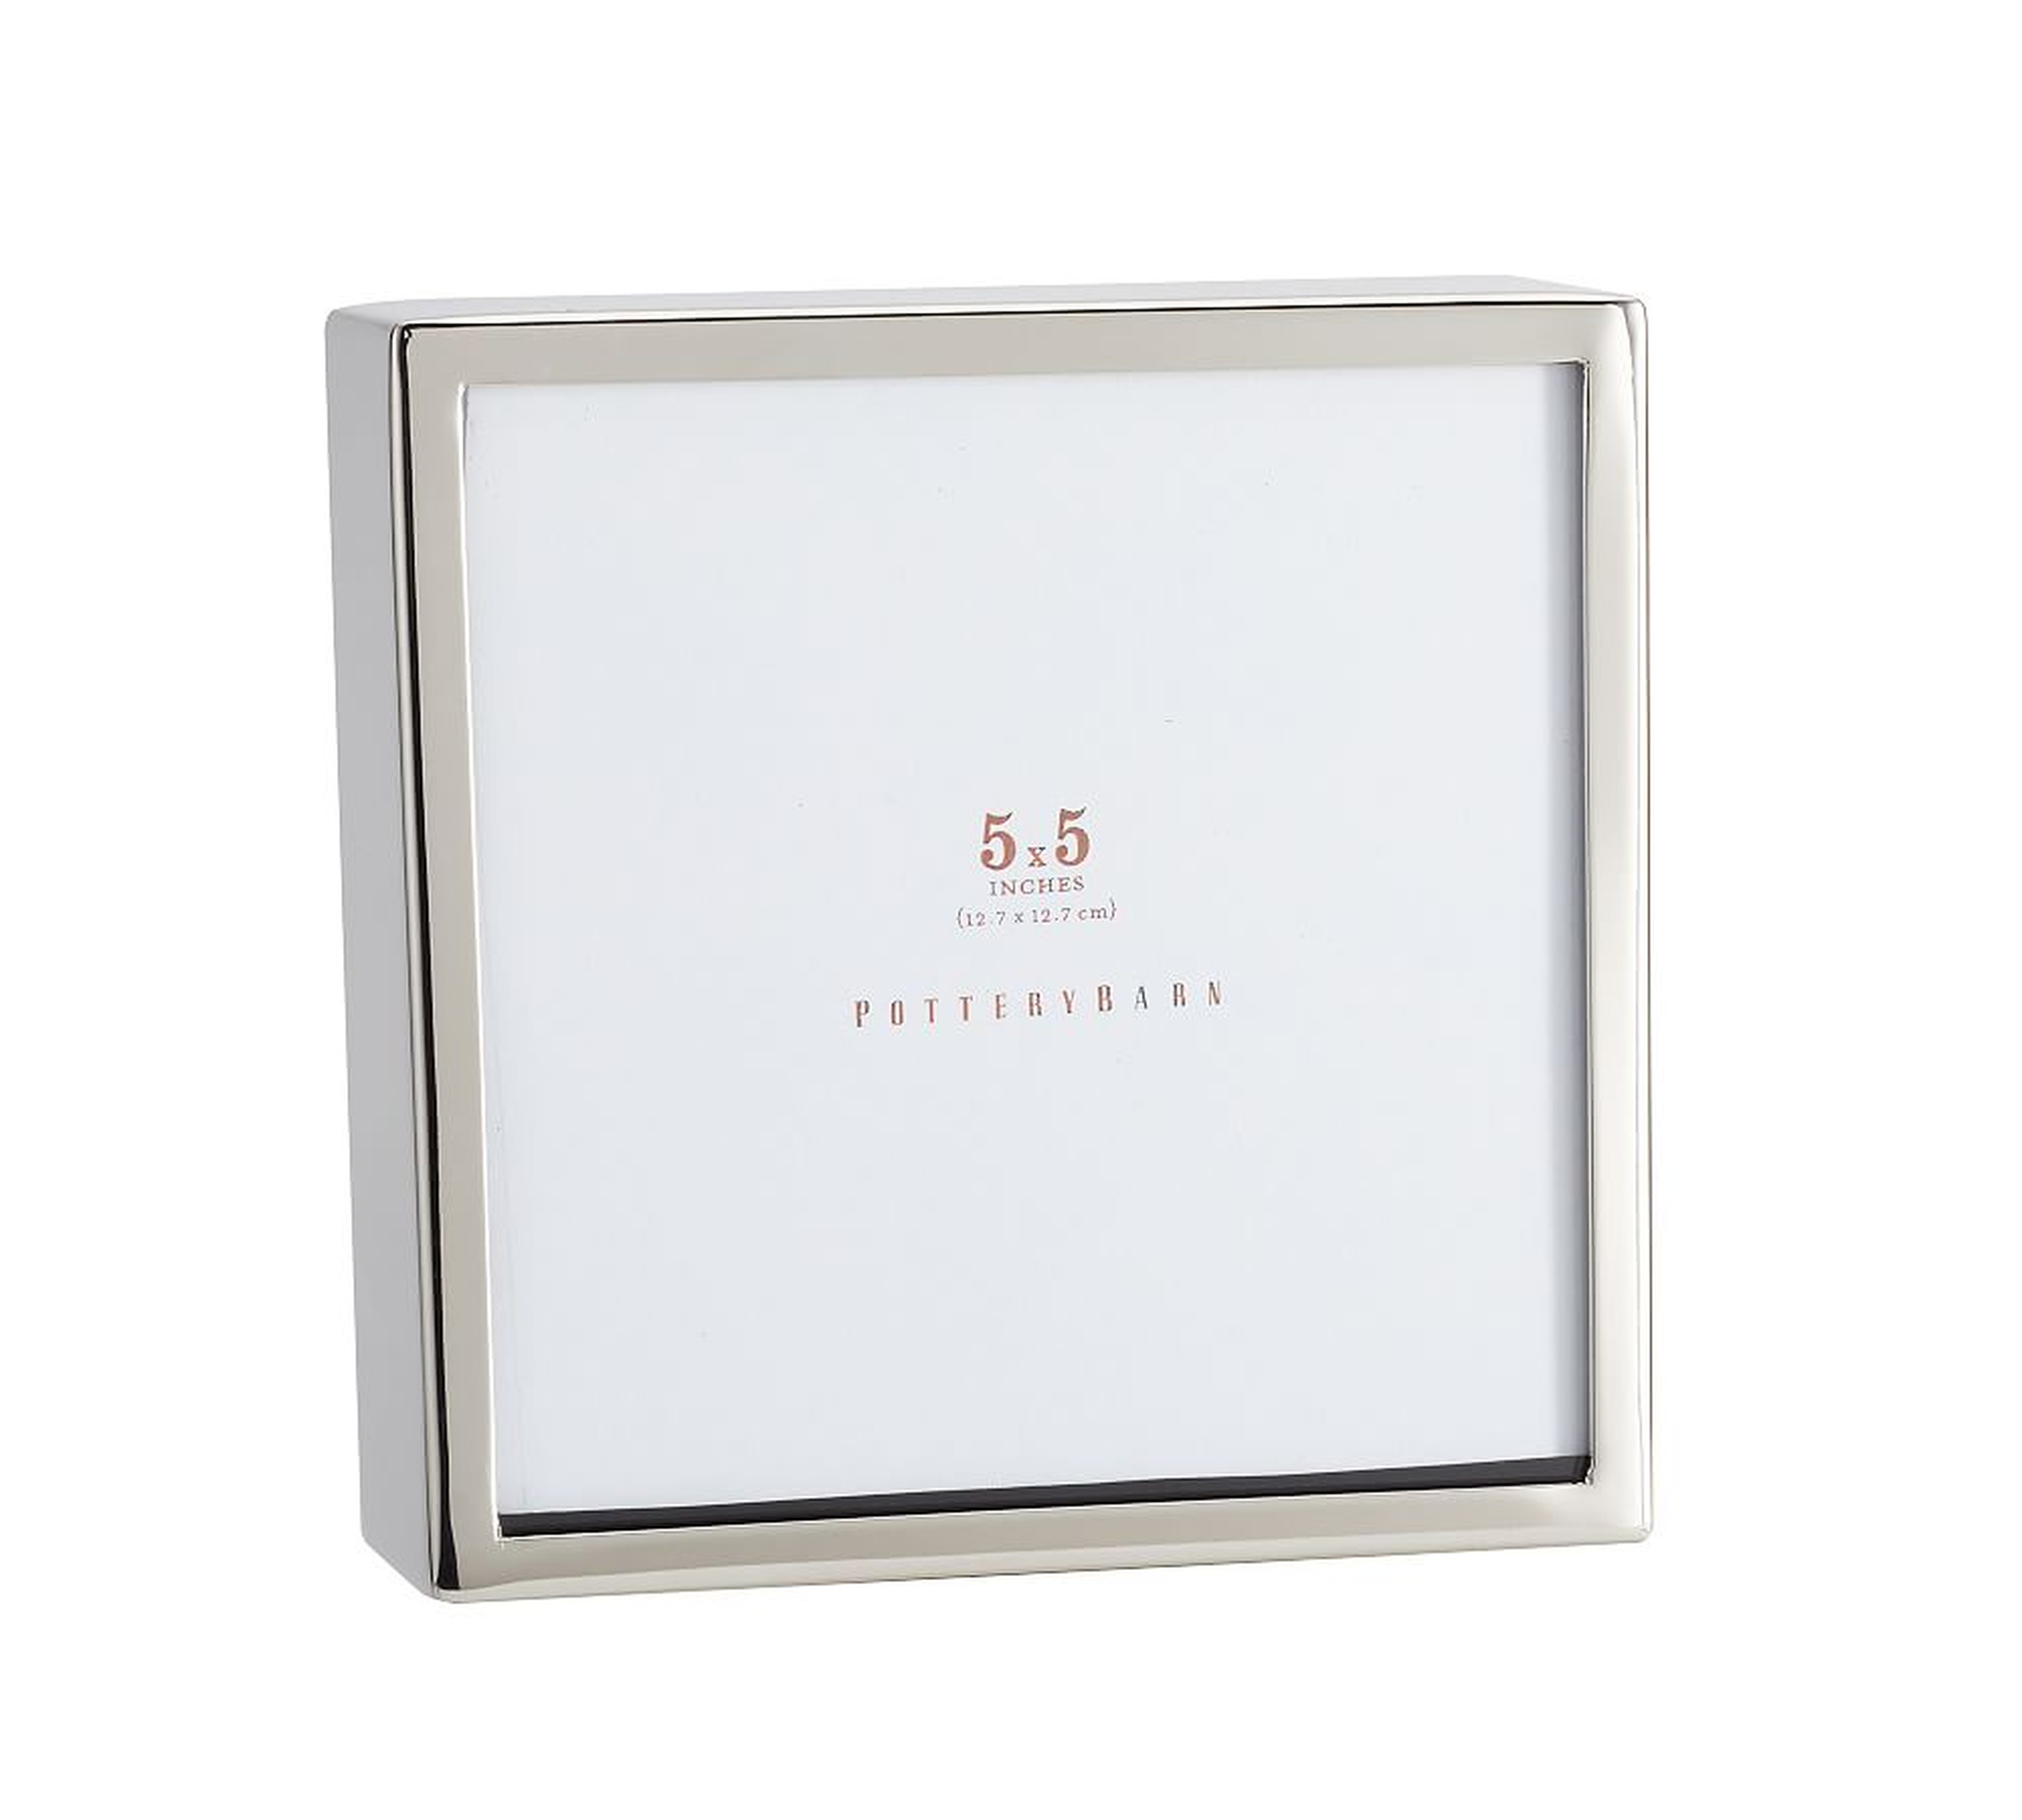 Hagen Picture Frame, Silver, 5" x 5" - Pottery Barn